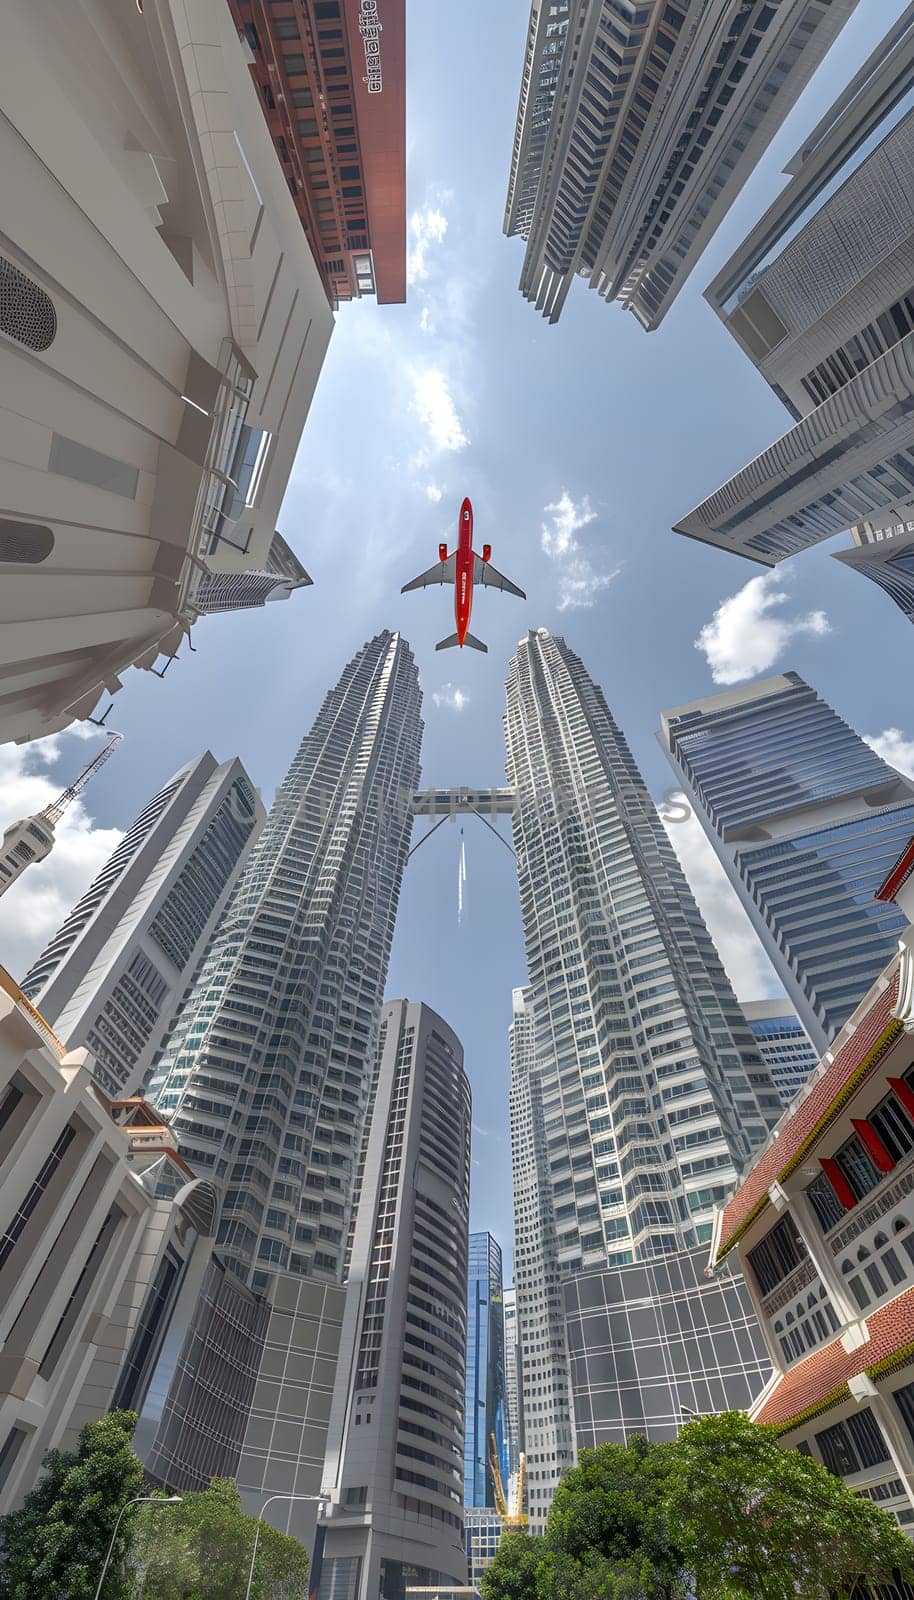 Observing a plane soaring above the urban landscape filled with buildings, skyscrapers, and towers, blending with the world below in a harmonious display of urban design